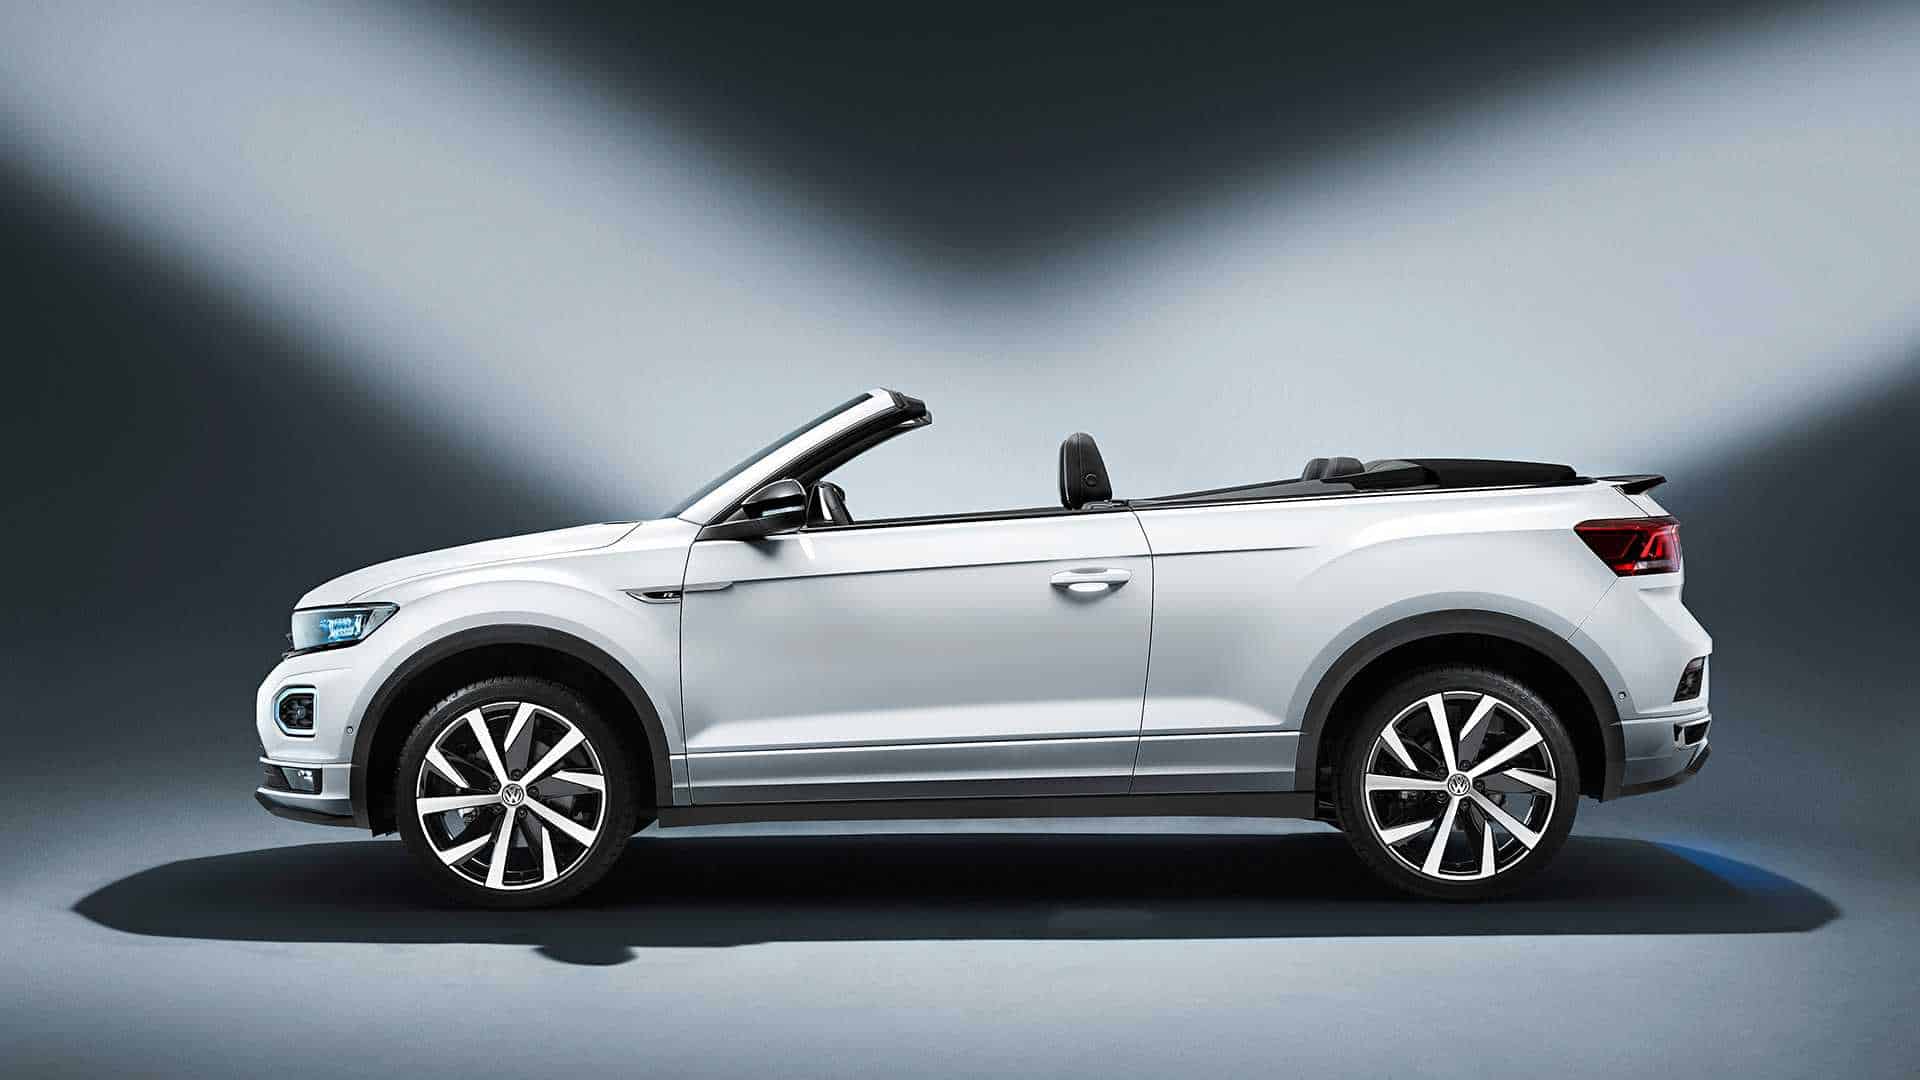 Gravel travel cabriolets are rare, but this has not curtailed VW's ambitions. 